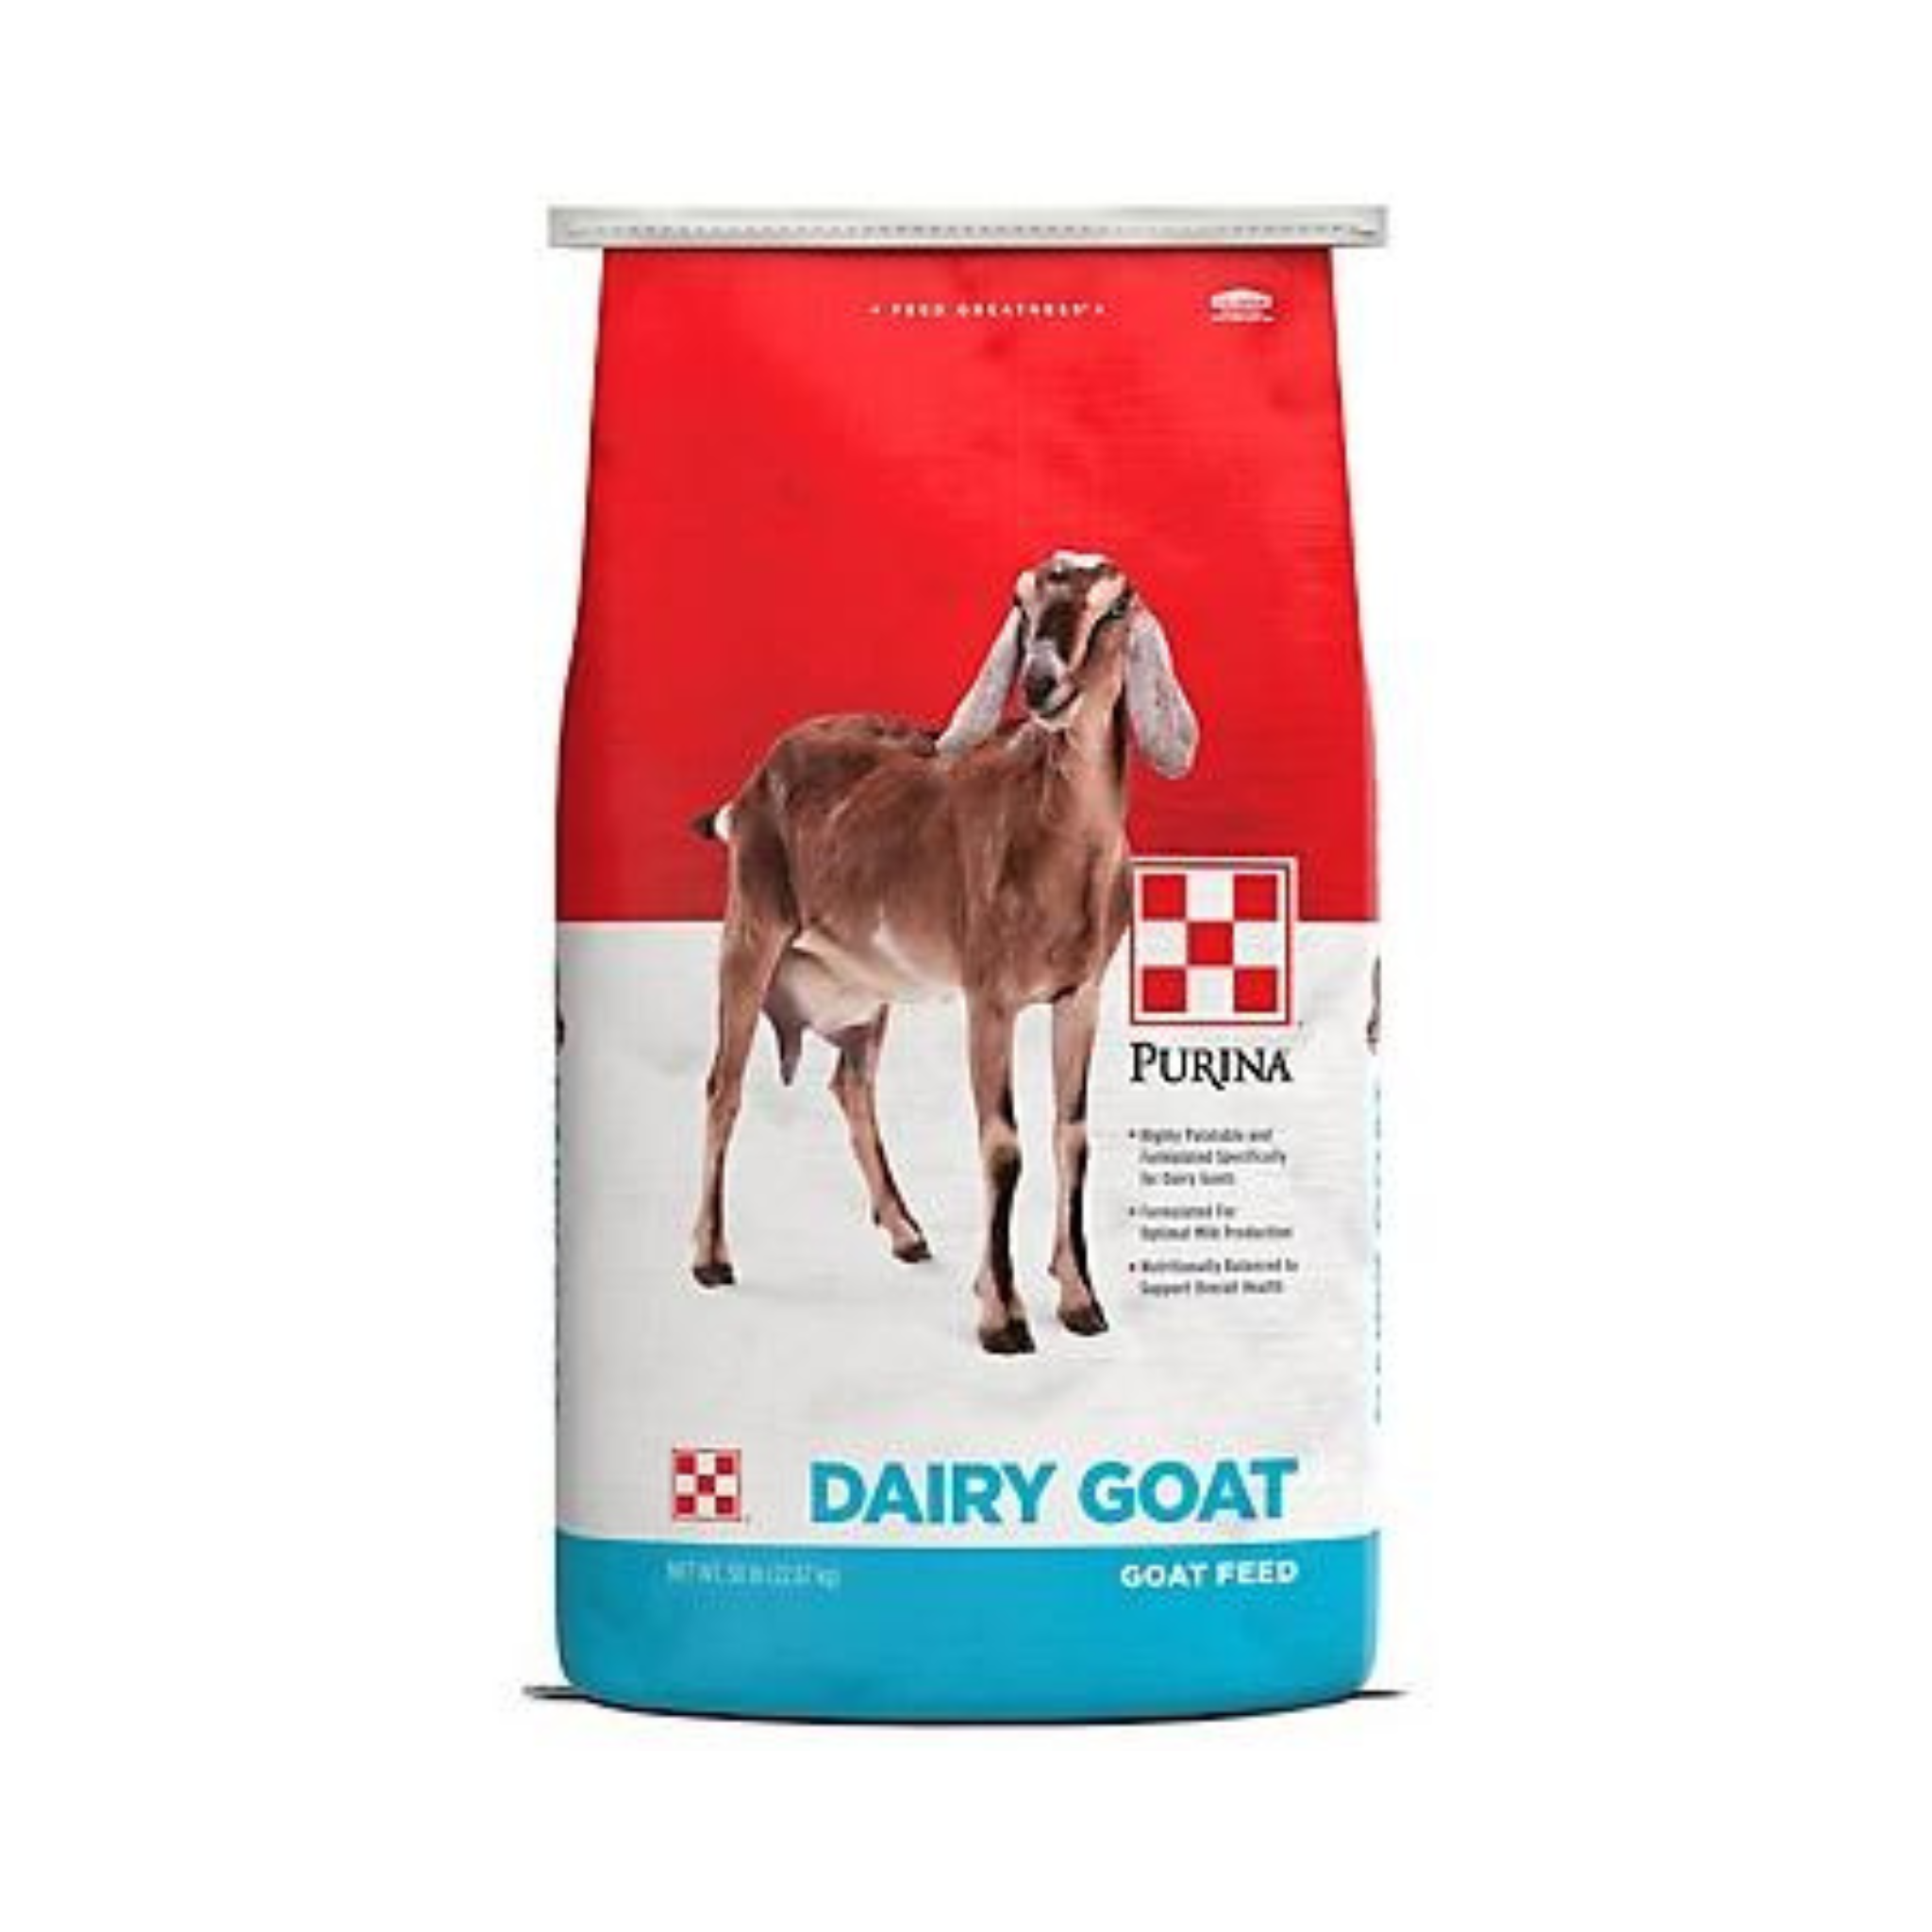 Purina Dairy Goat Parlor 18 Feed